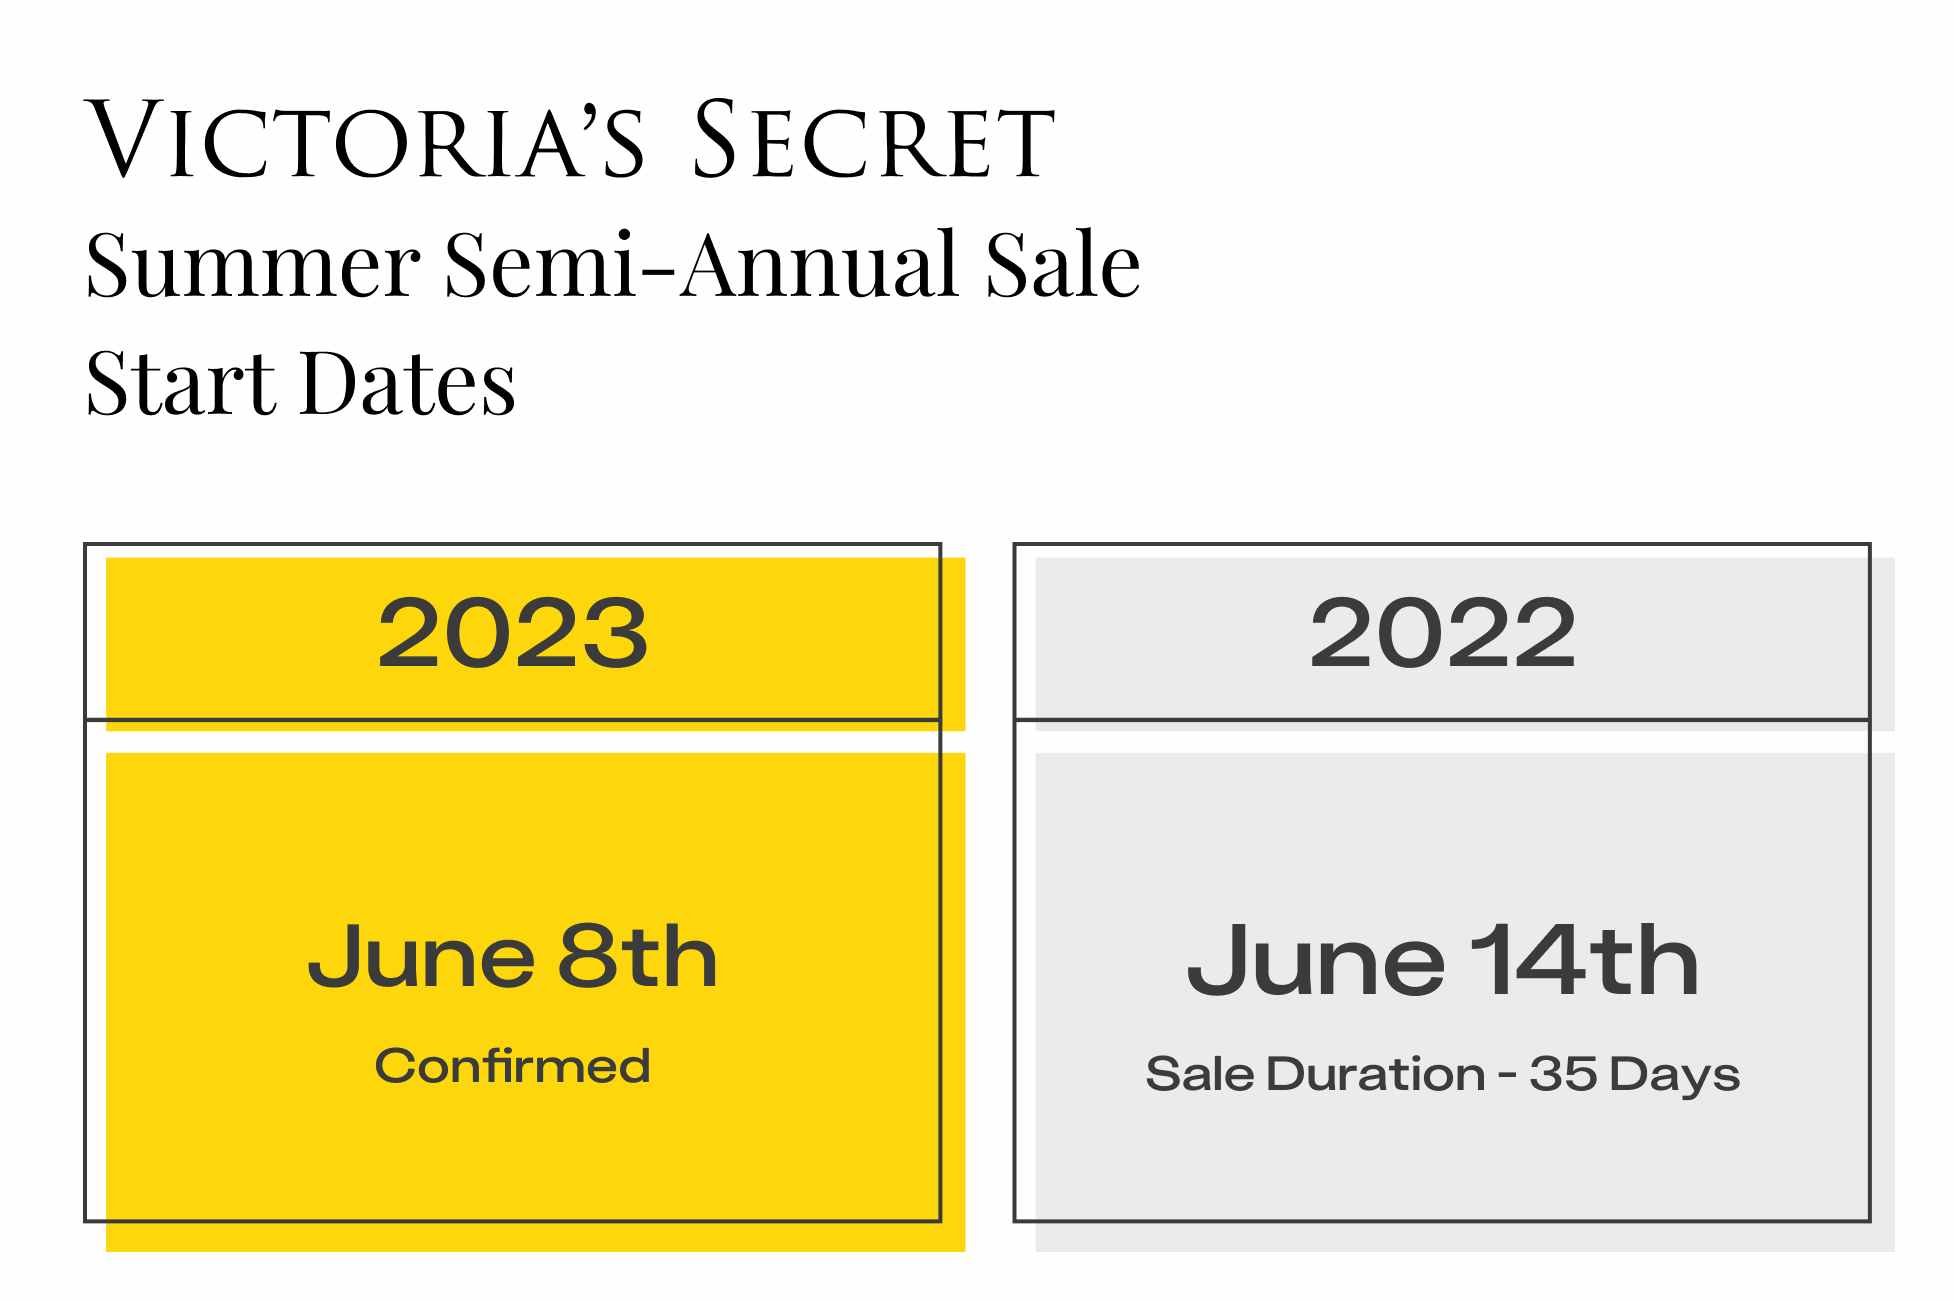 A graphic showing the start dates for the Victoria's Secret Summer Semi Annual Sale